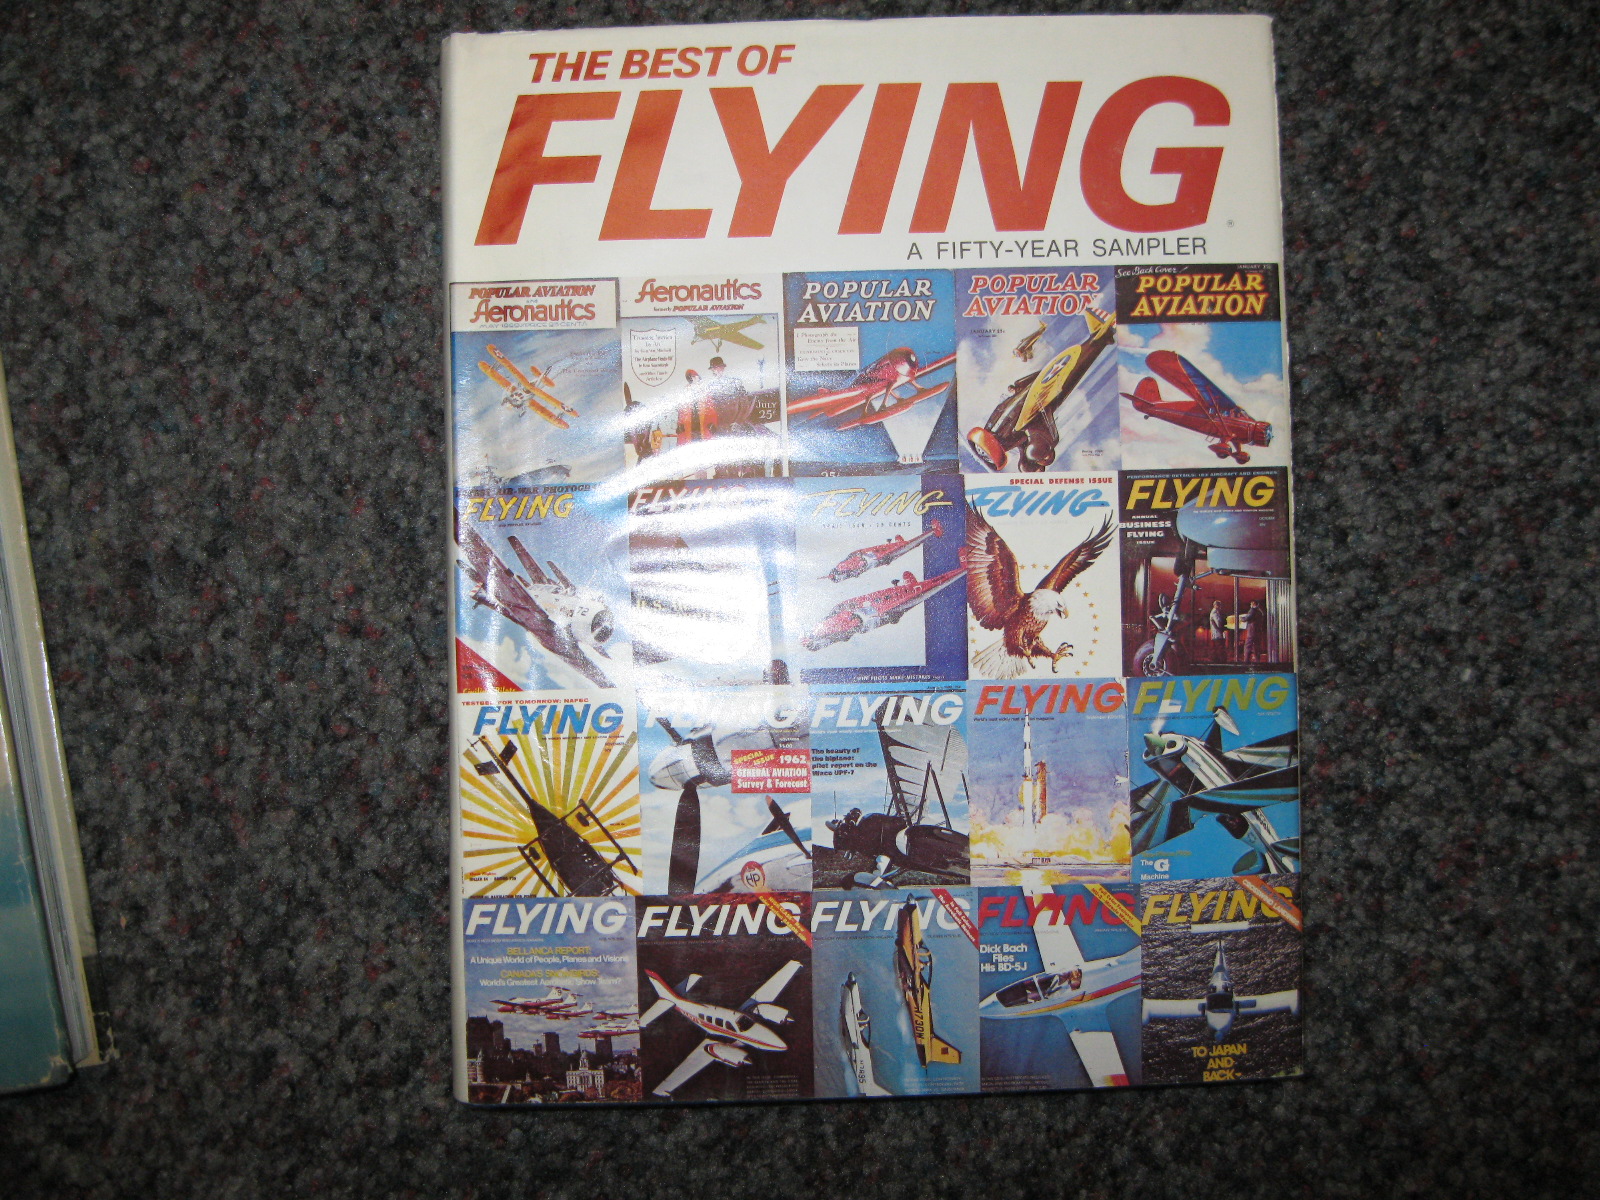 The best of Flying a fifty year sampler